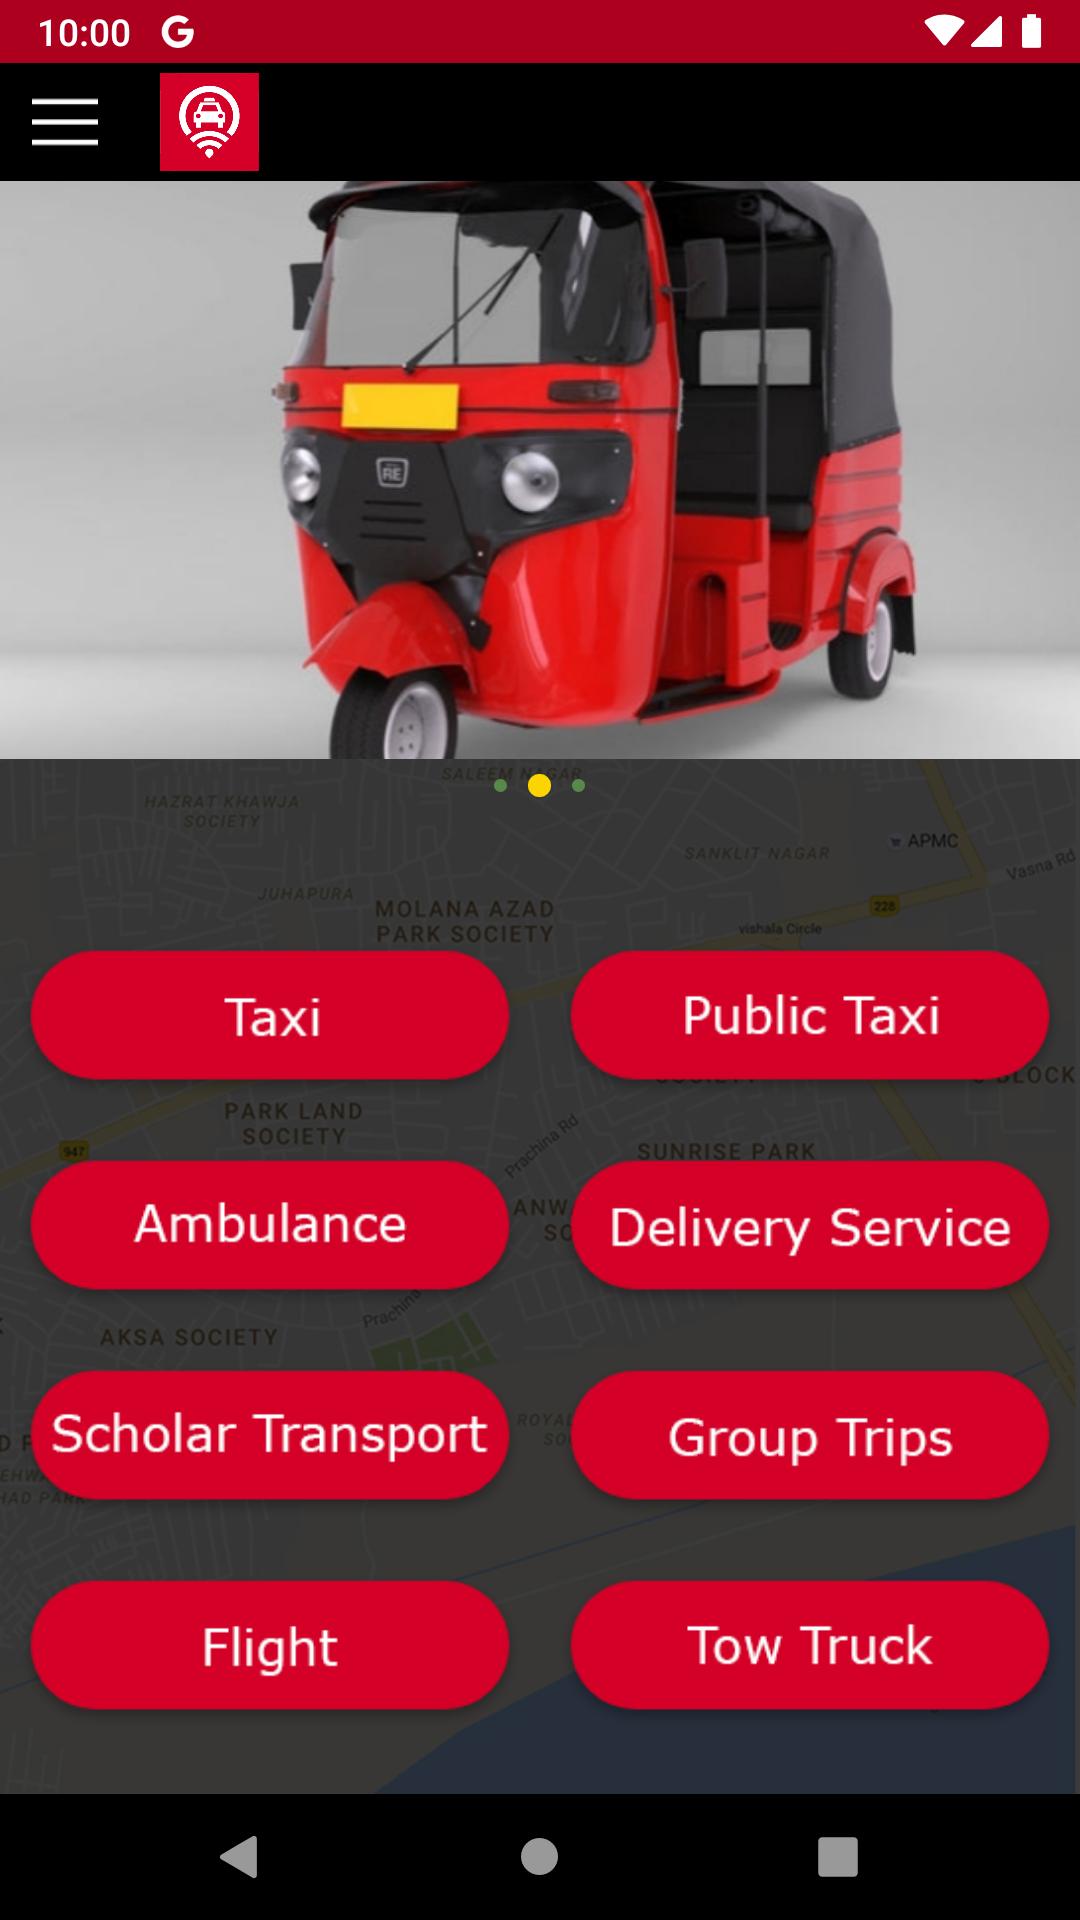 Piki-Piki Smart Rides for Android - APK Download - 